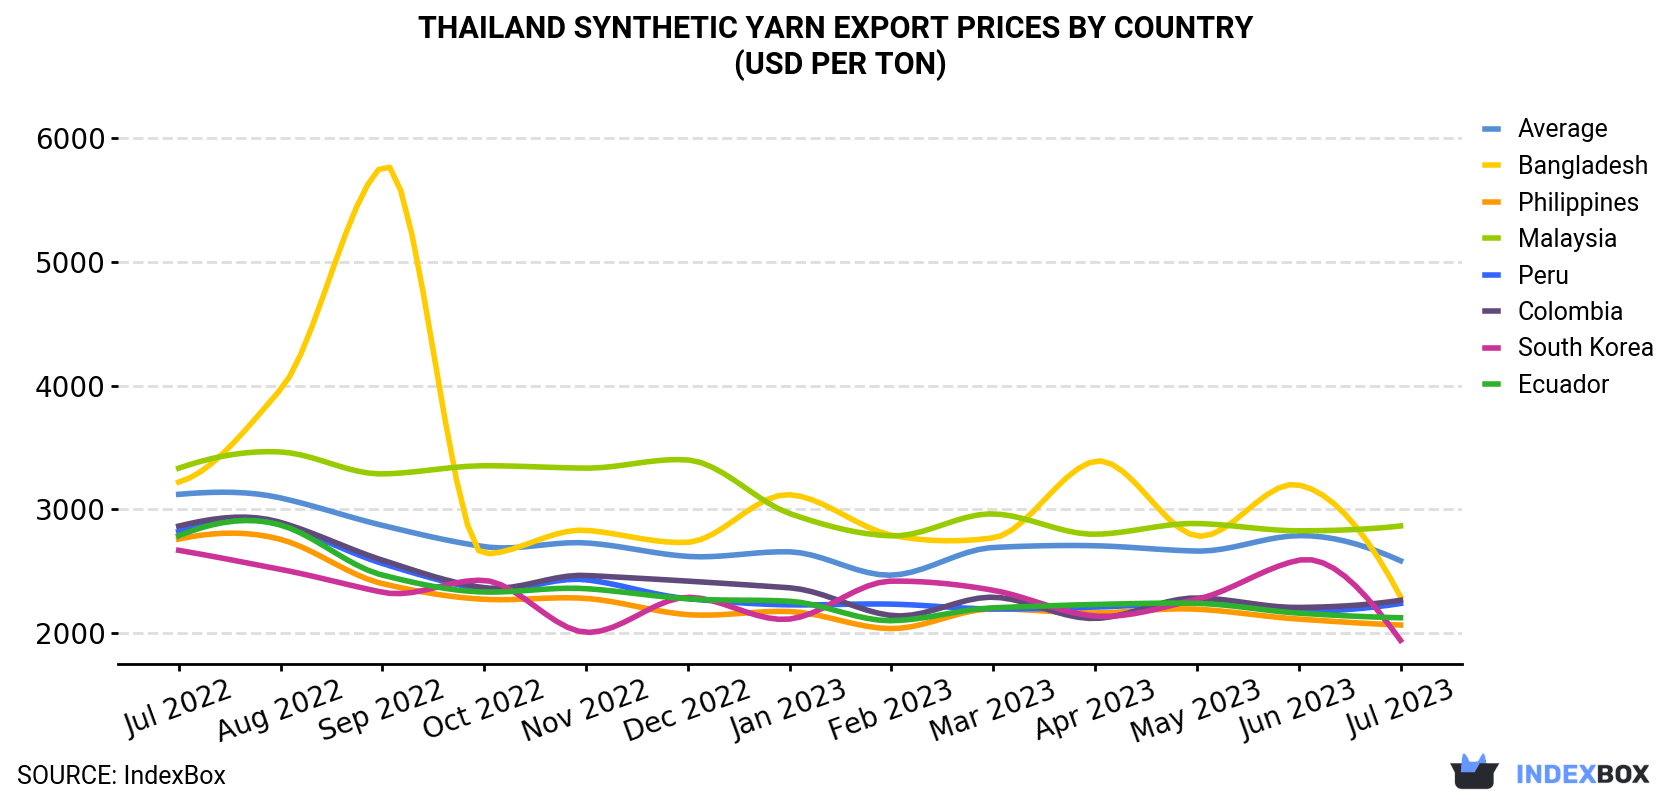 Thailand Synthetic Yarn Export Prices By Country (USD Per Ton)